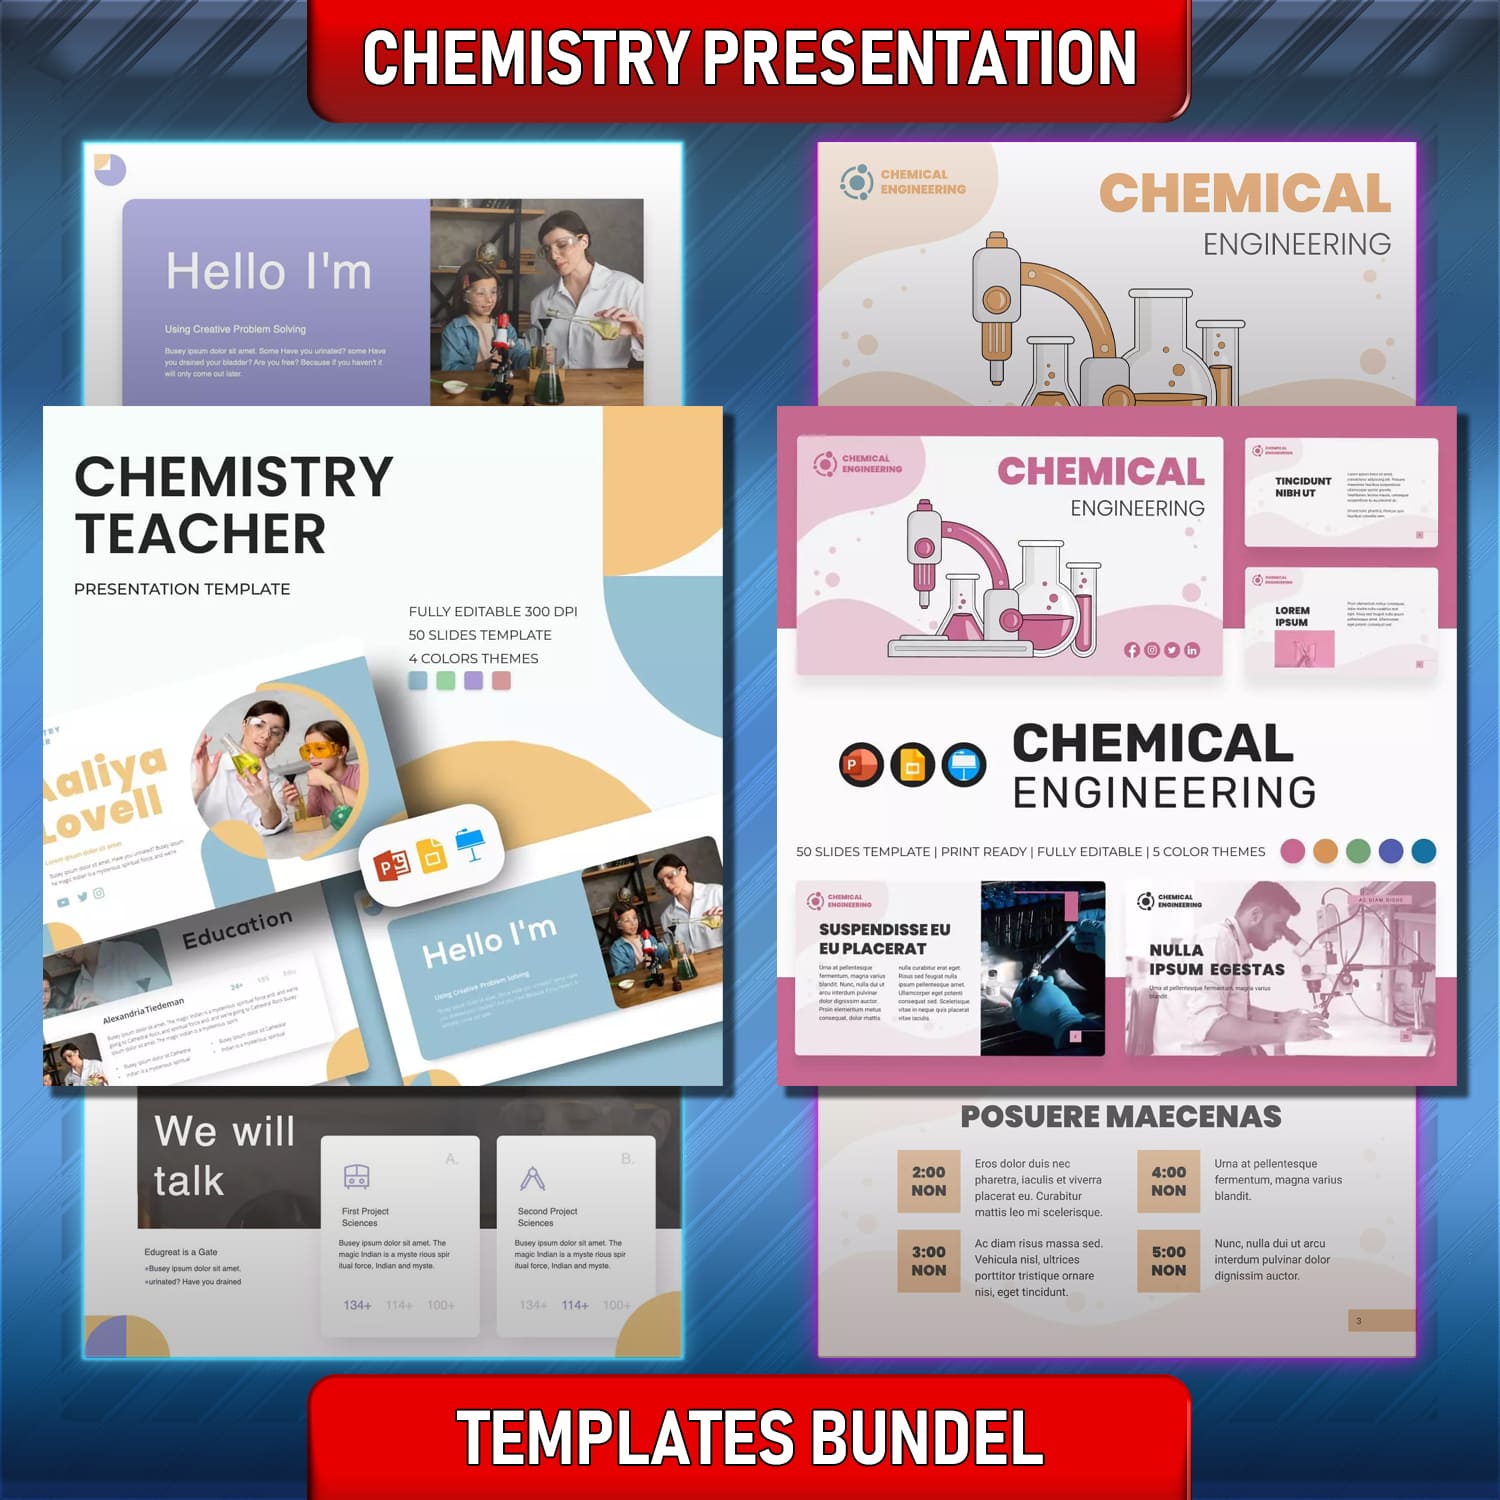 Collection of images of colorful presentation template slides on the topic of chemistry.